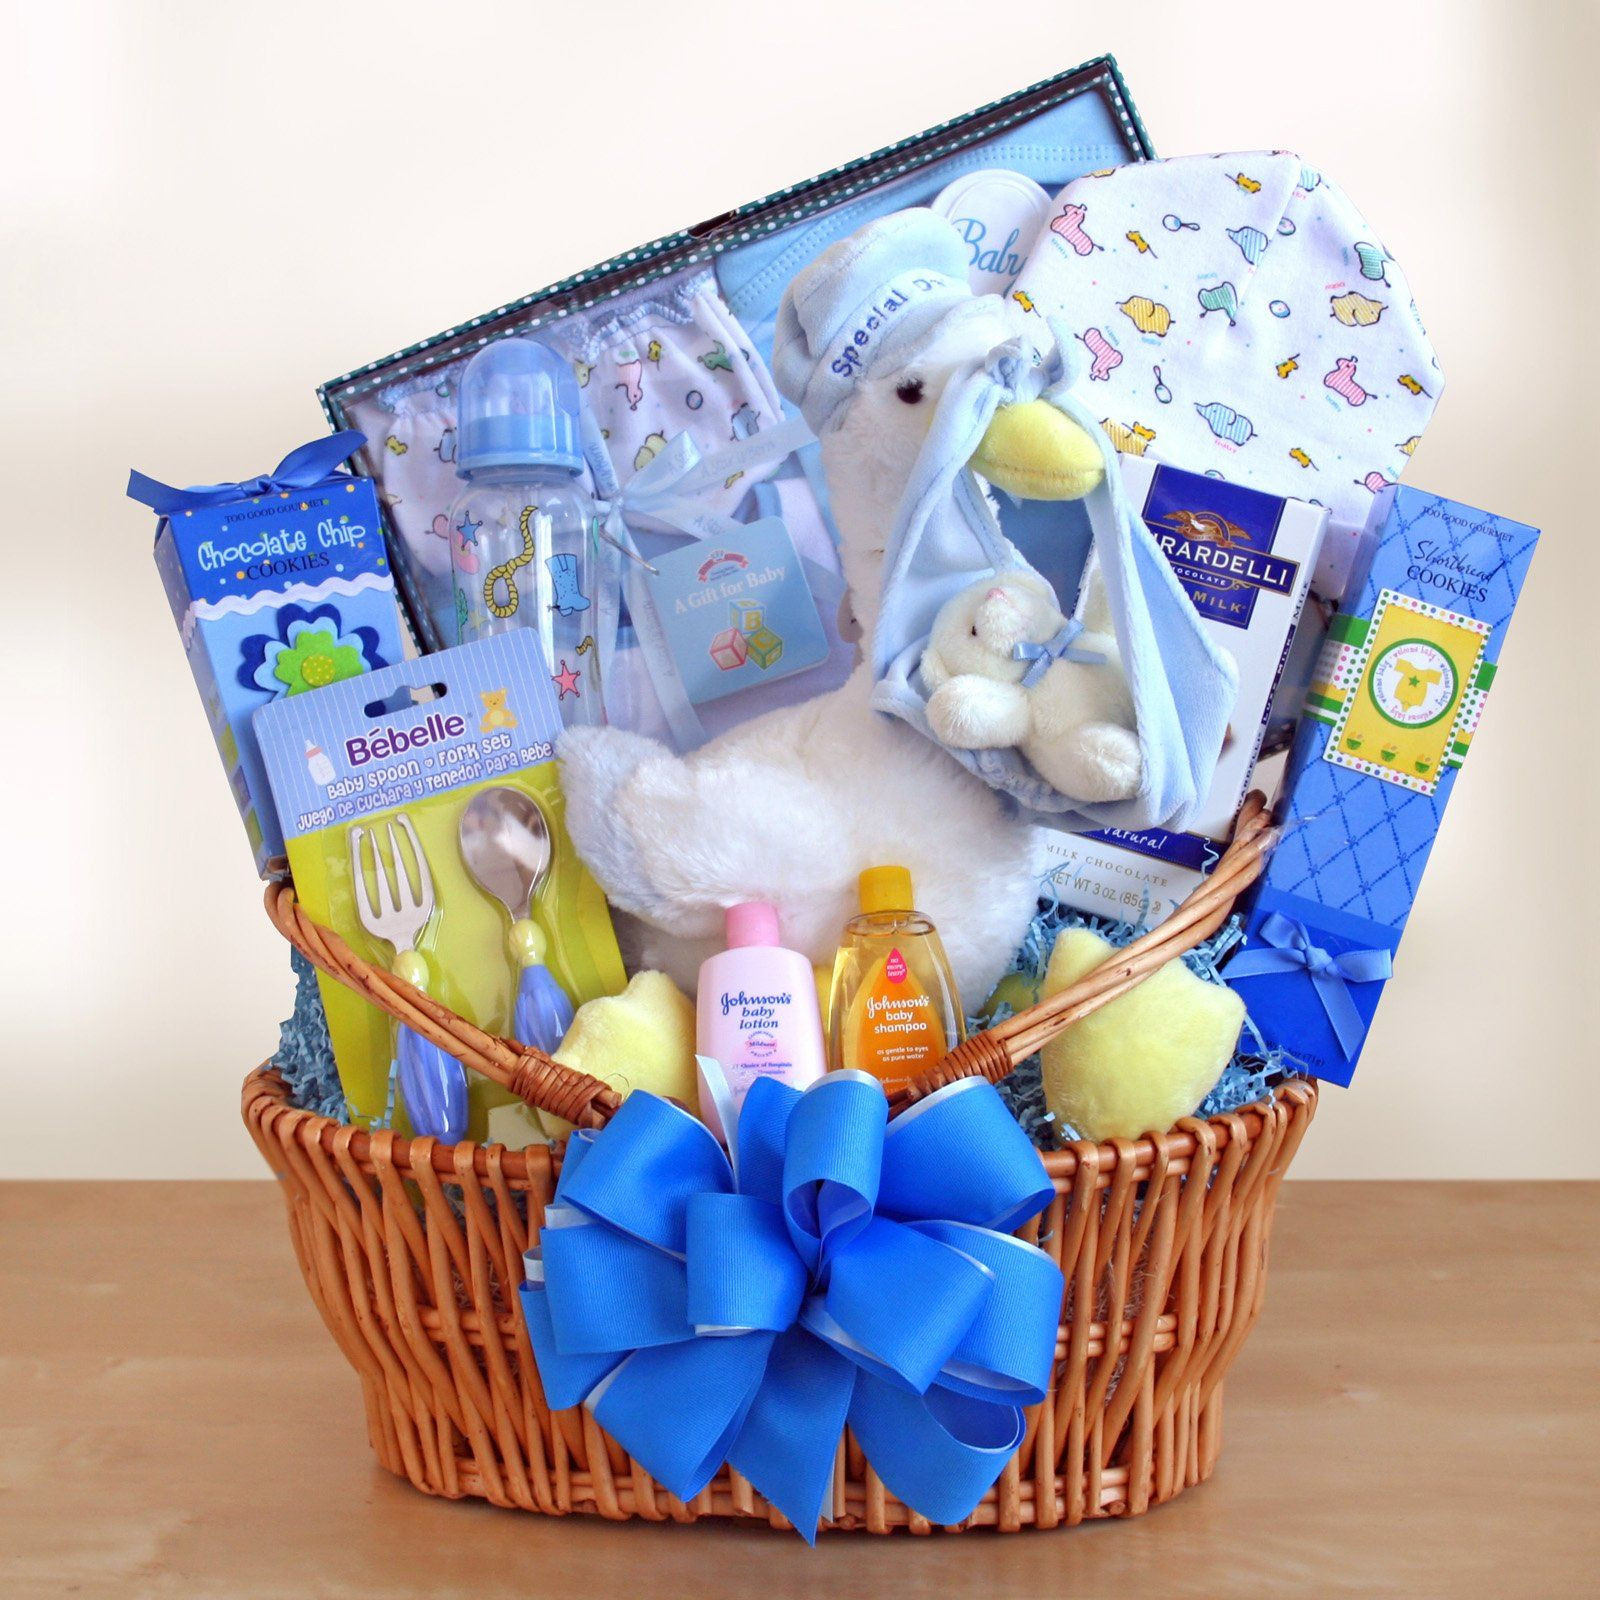 Good Baby Gift Ideas
 Special Stork Delivery Baby Boy Gift Basket